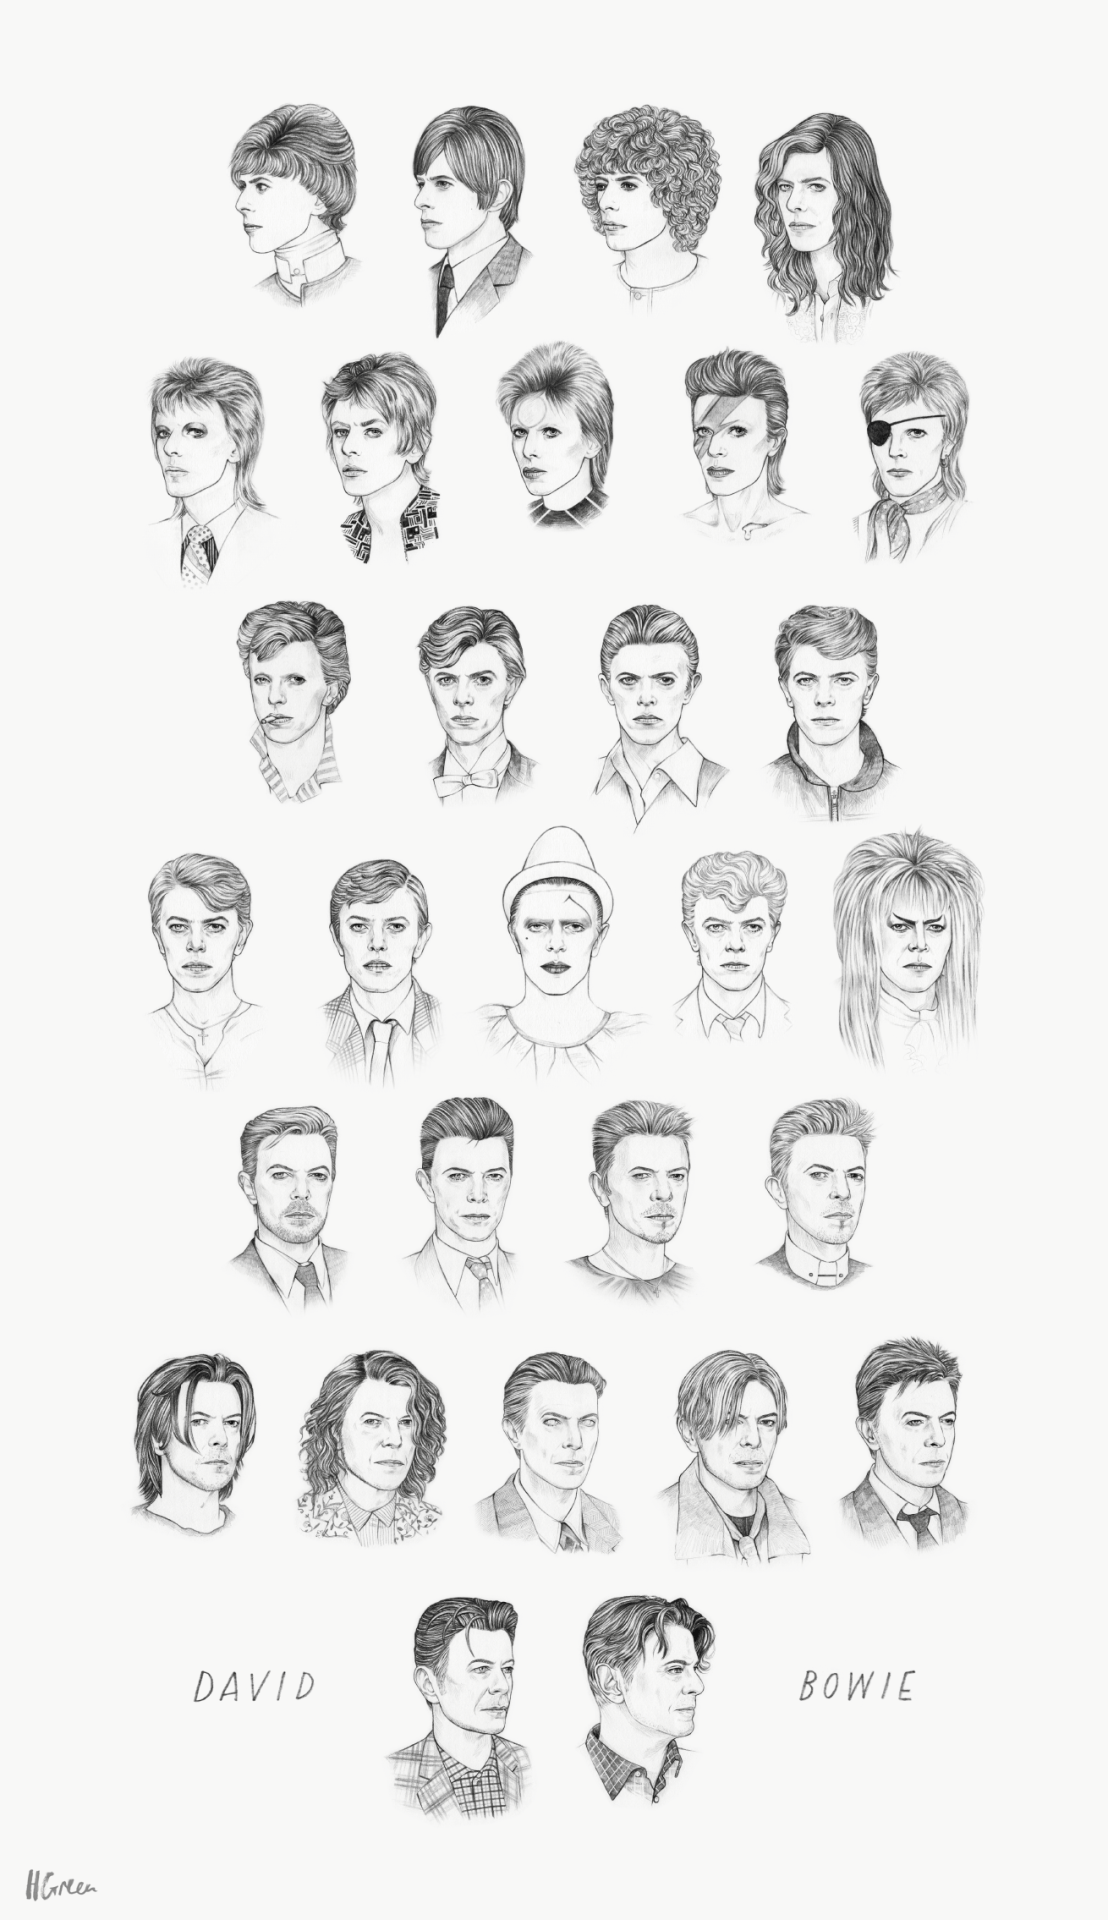 See David Bowie Transform Over The Years In One Animated GIF